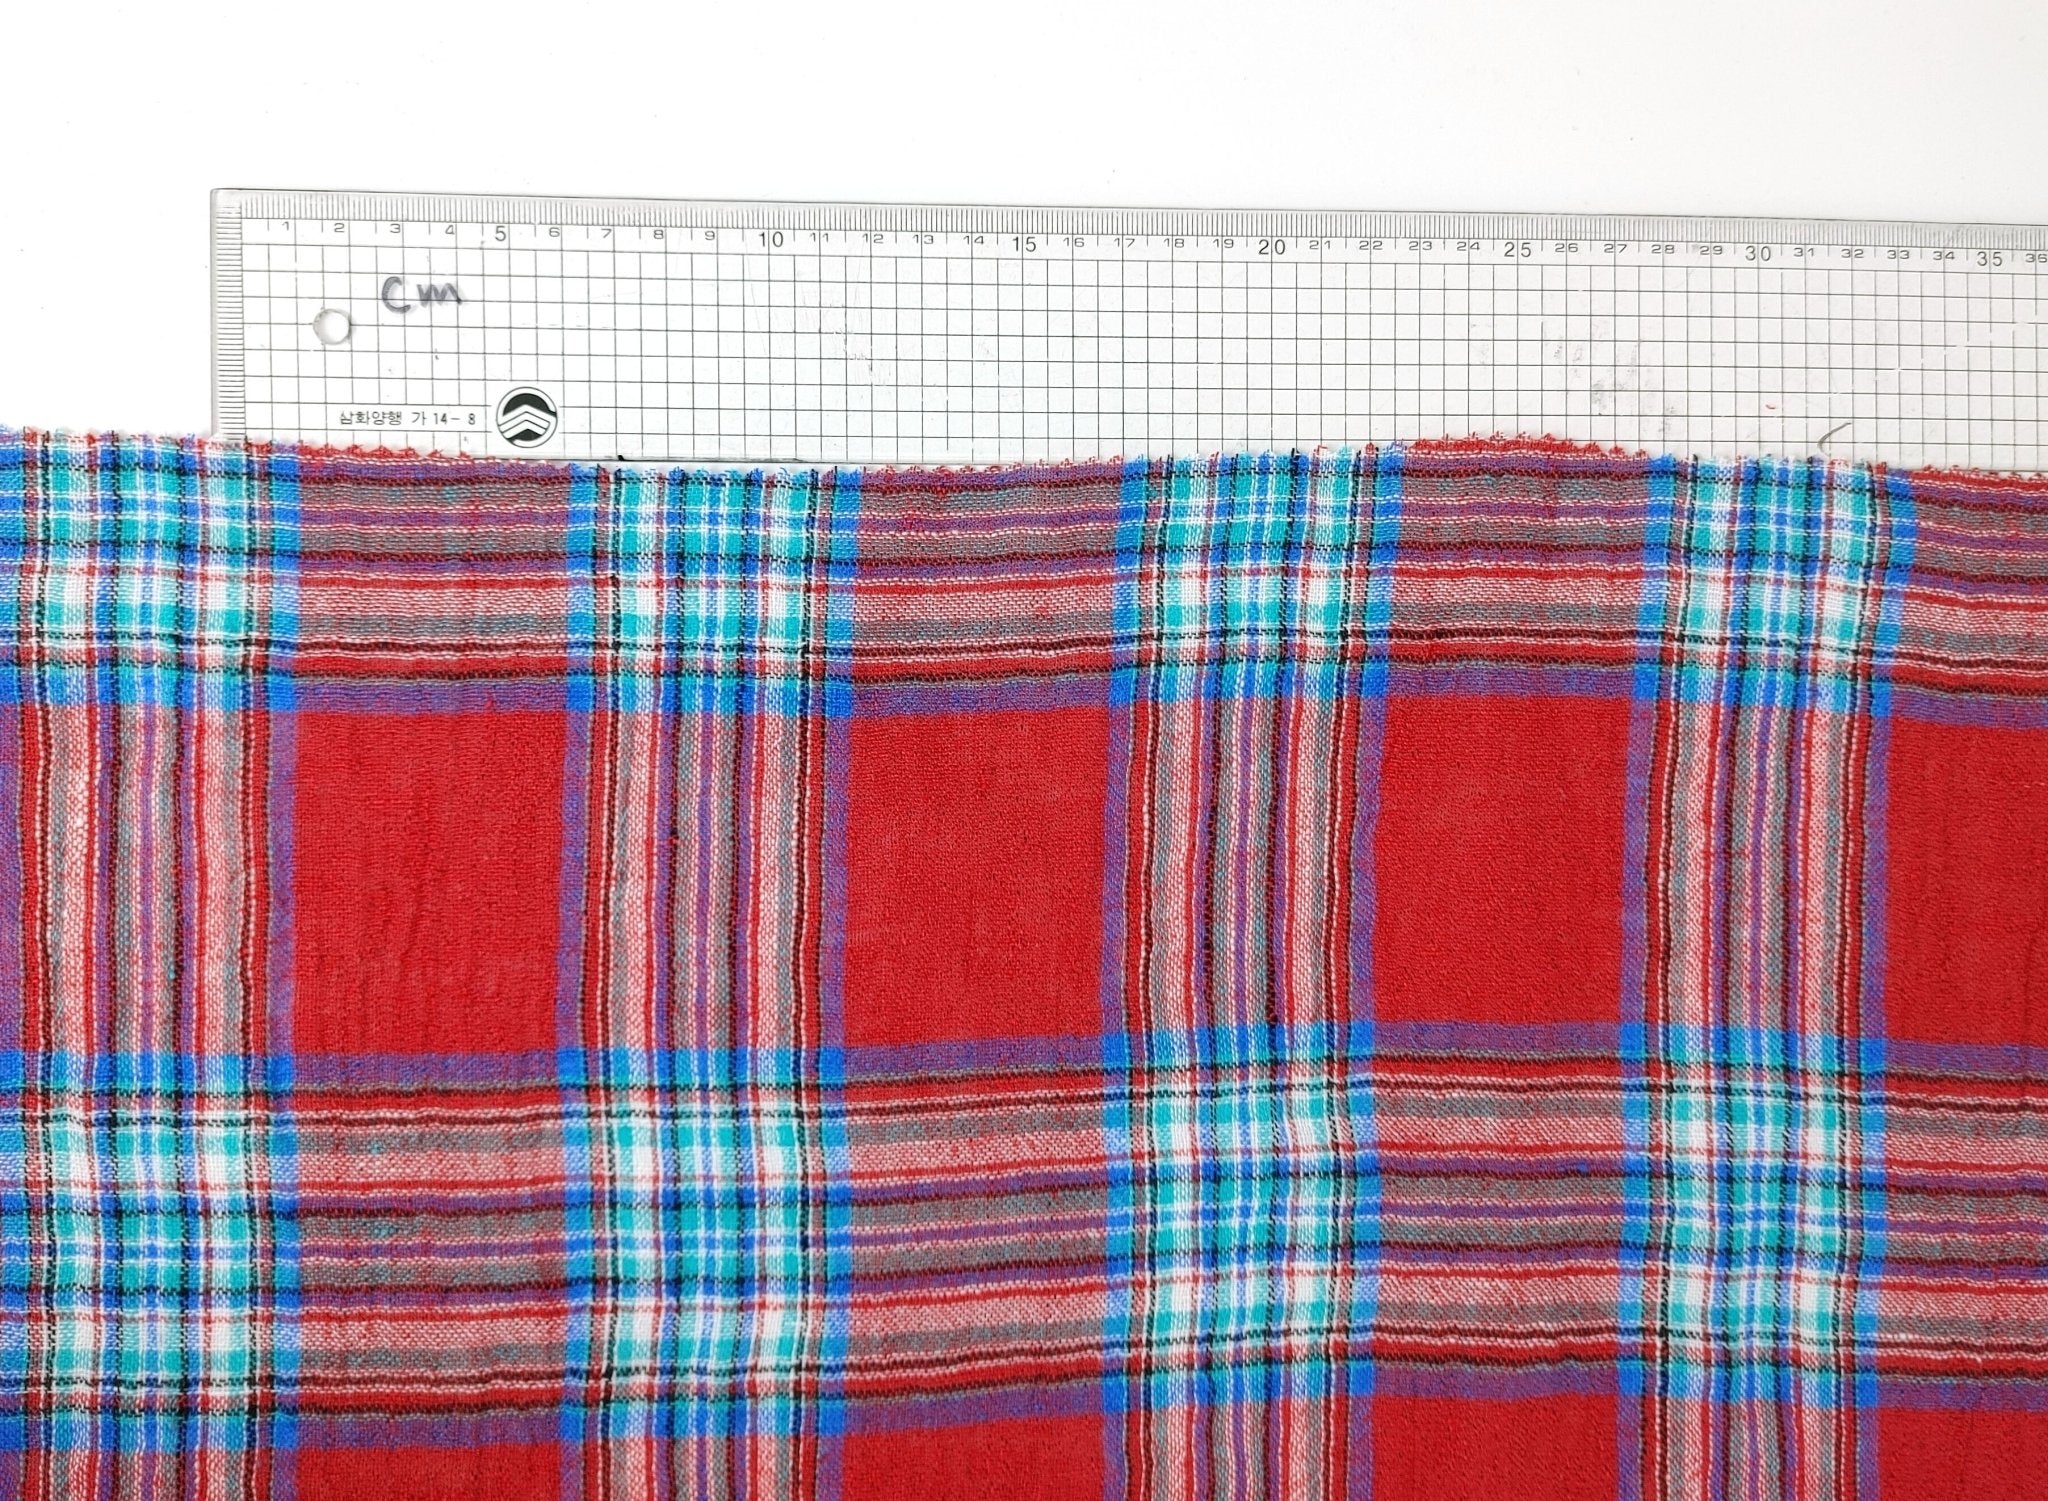 Vibrant Wrinkle-Textured Plaid: Linen Polyester Blend for Effortless Style 7580 - The Linen Lab - Red